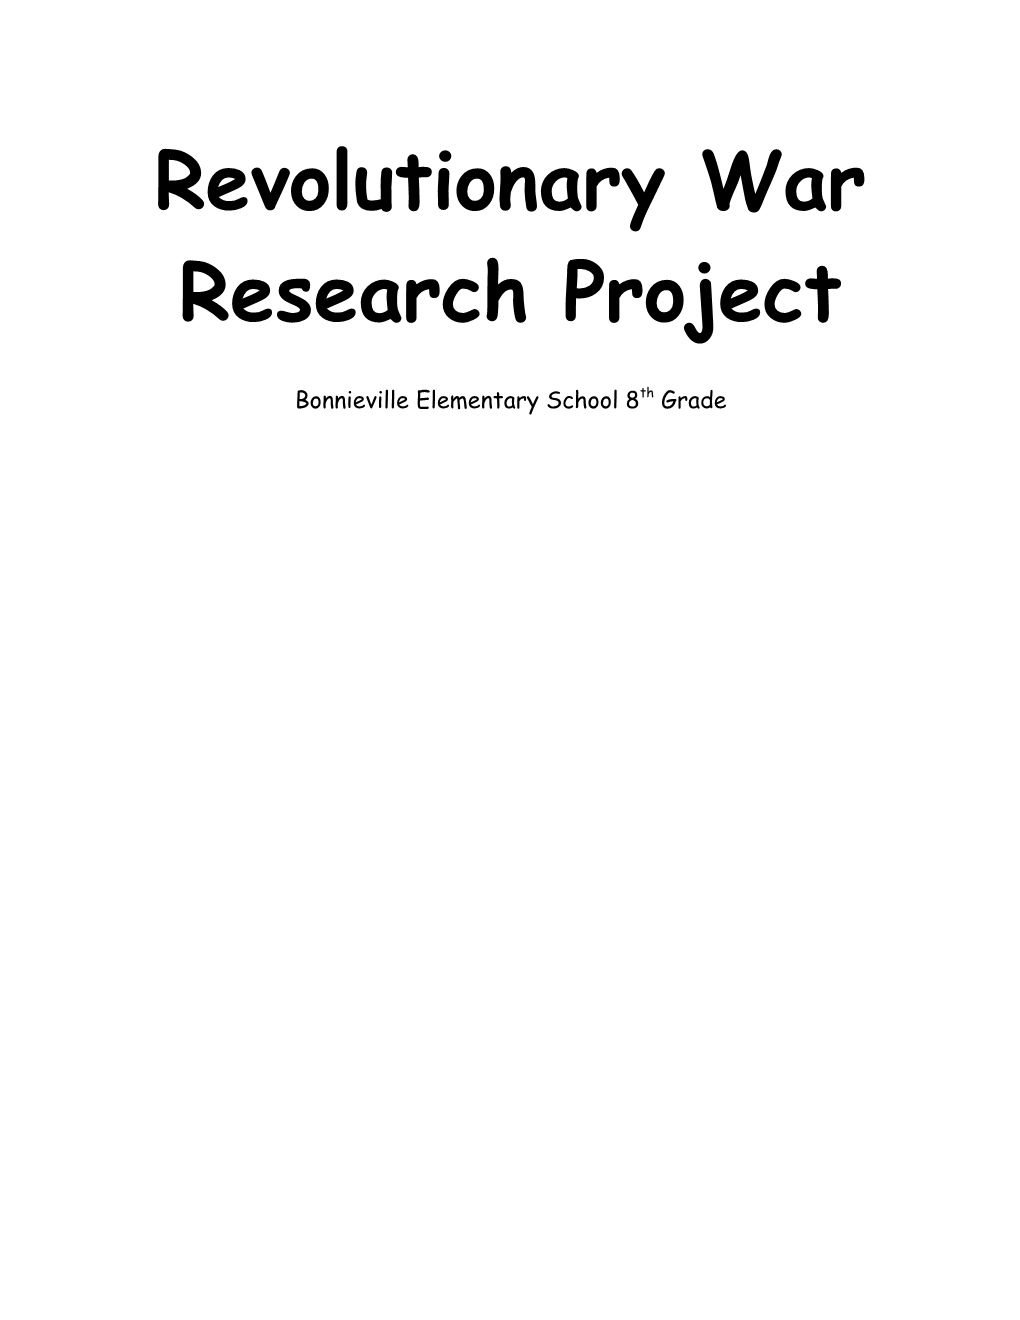 Revolutionary War Research Project